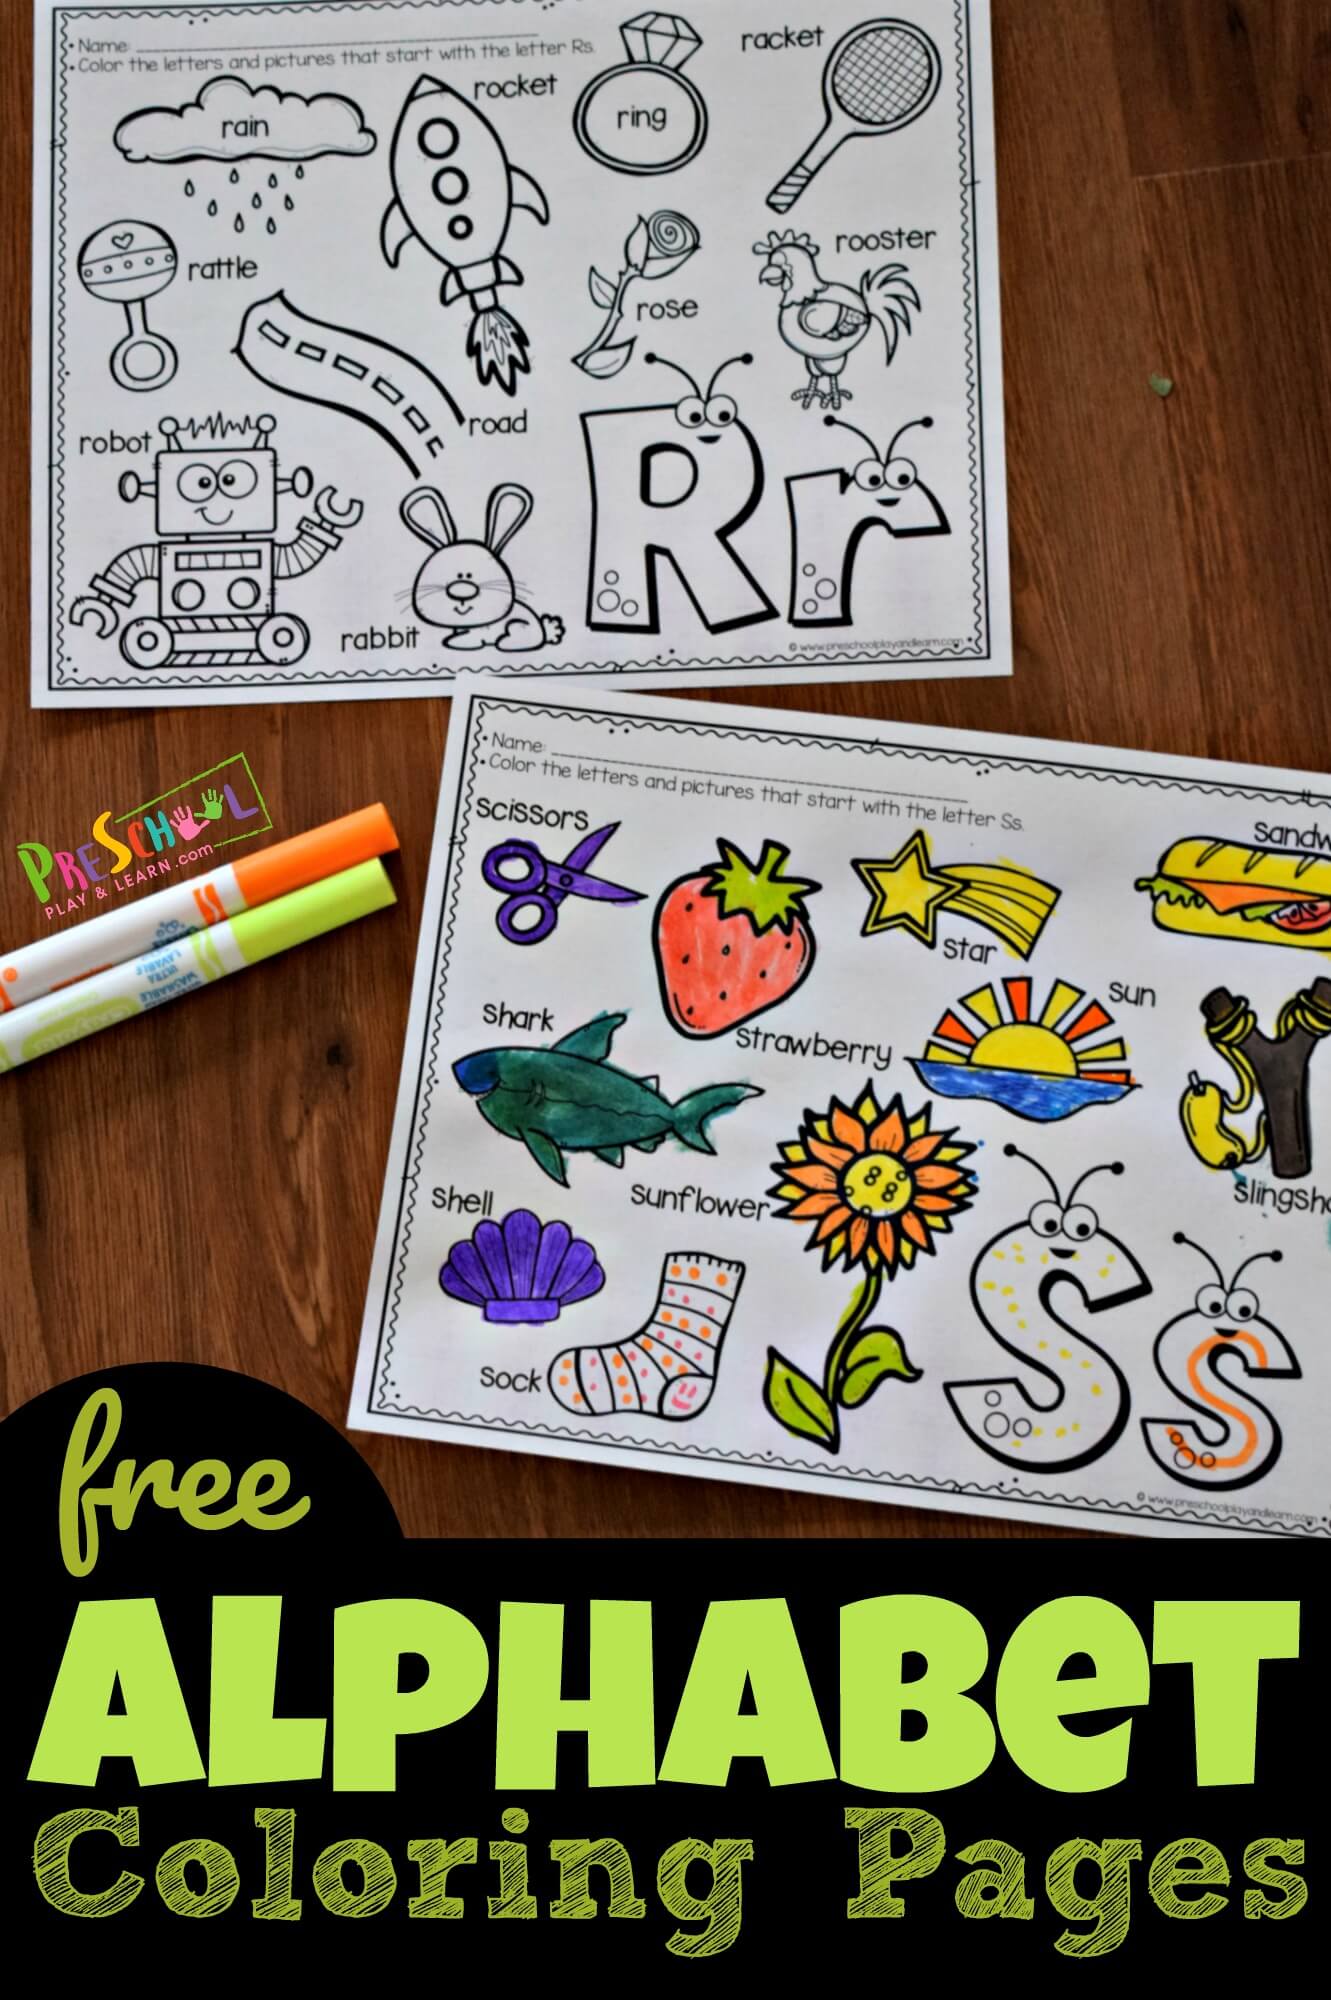 Free Printable X-Ray Coloring Pages Pikachu coloring pages - Free Printable Pictures